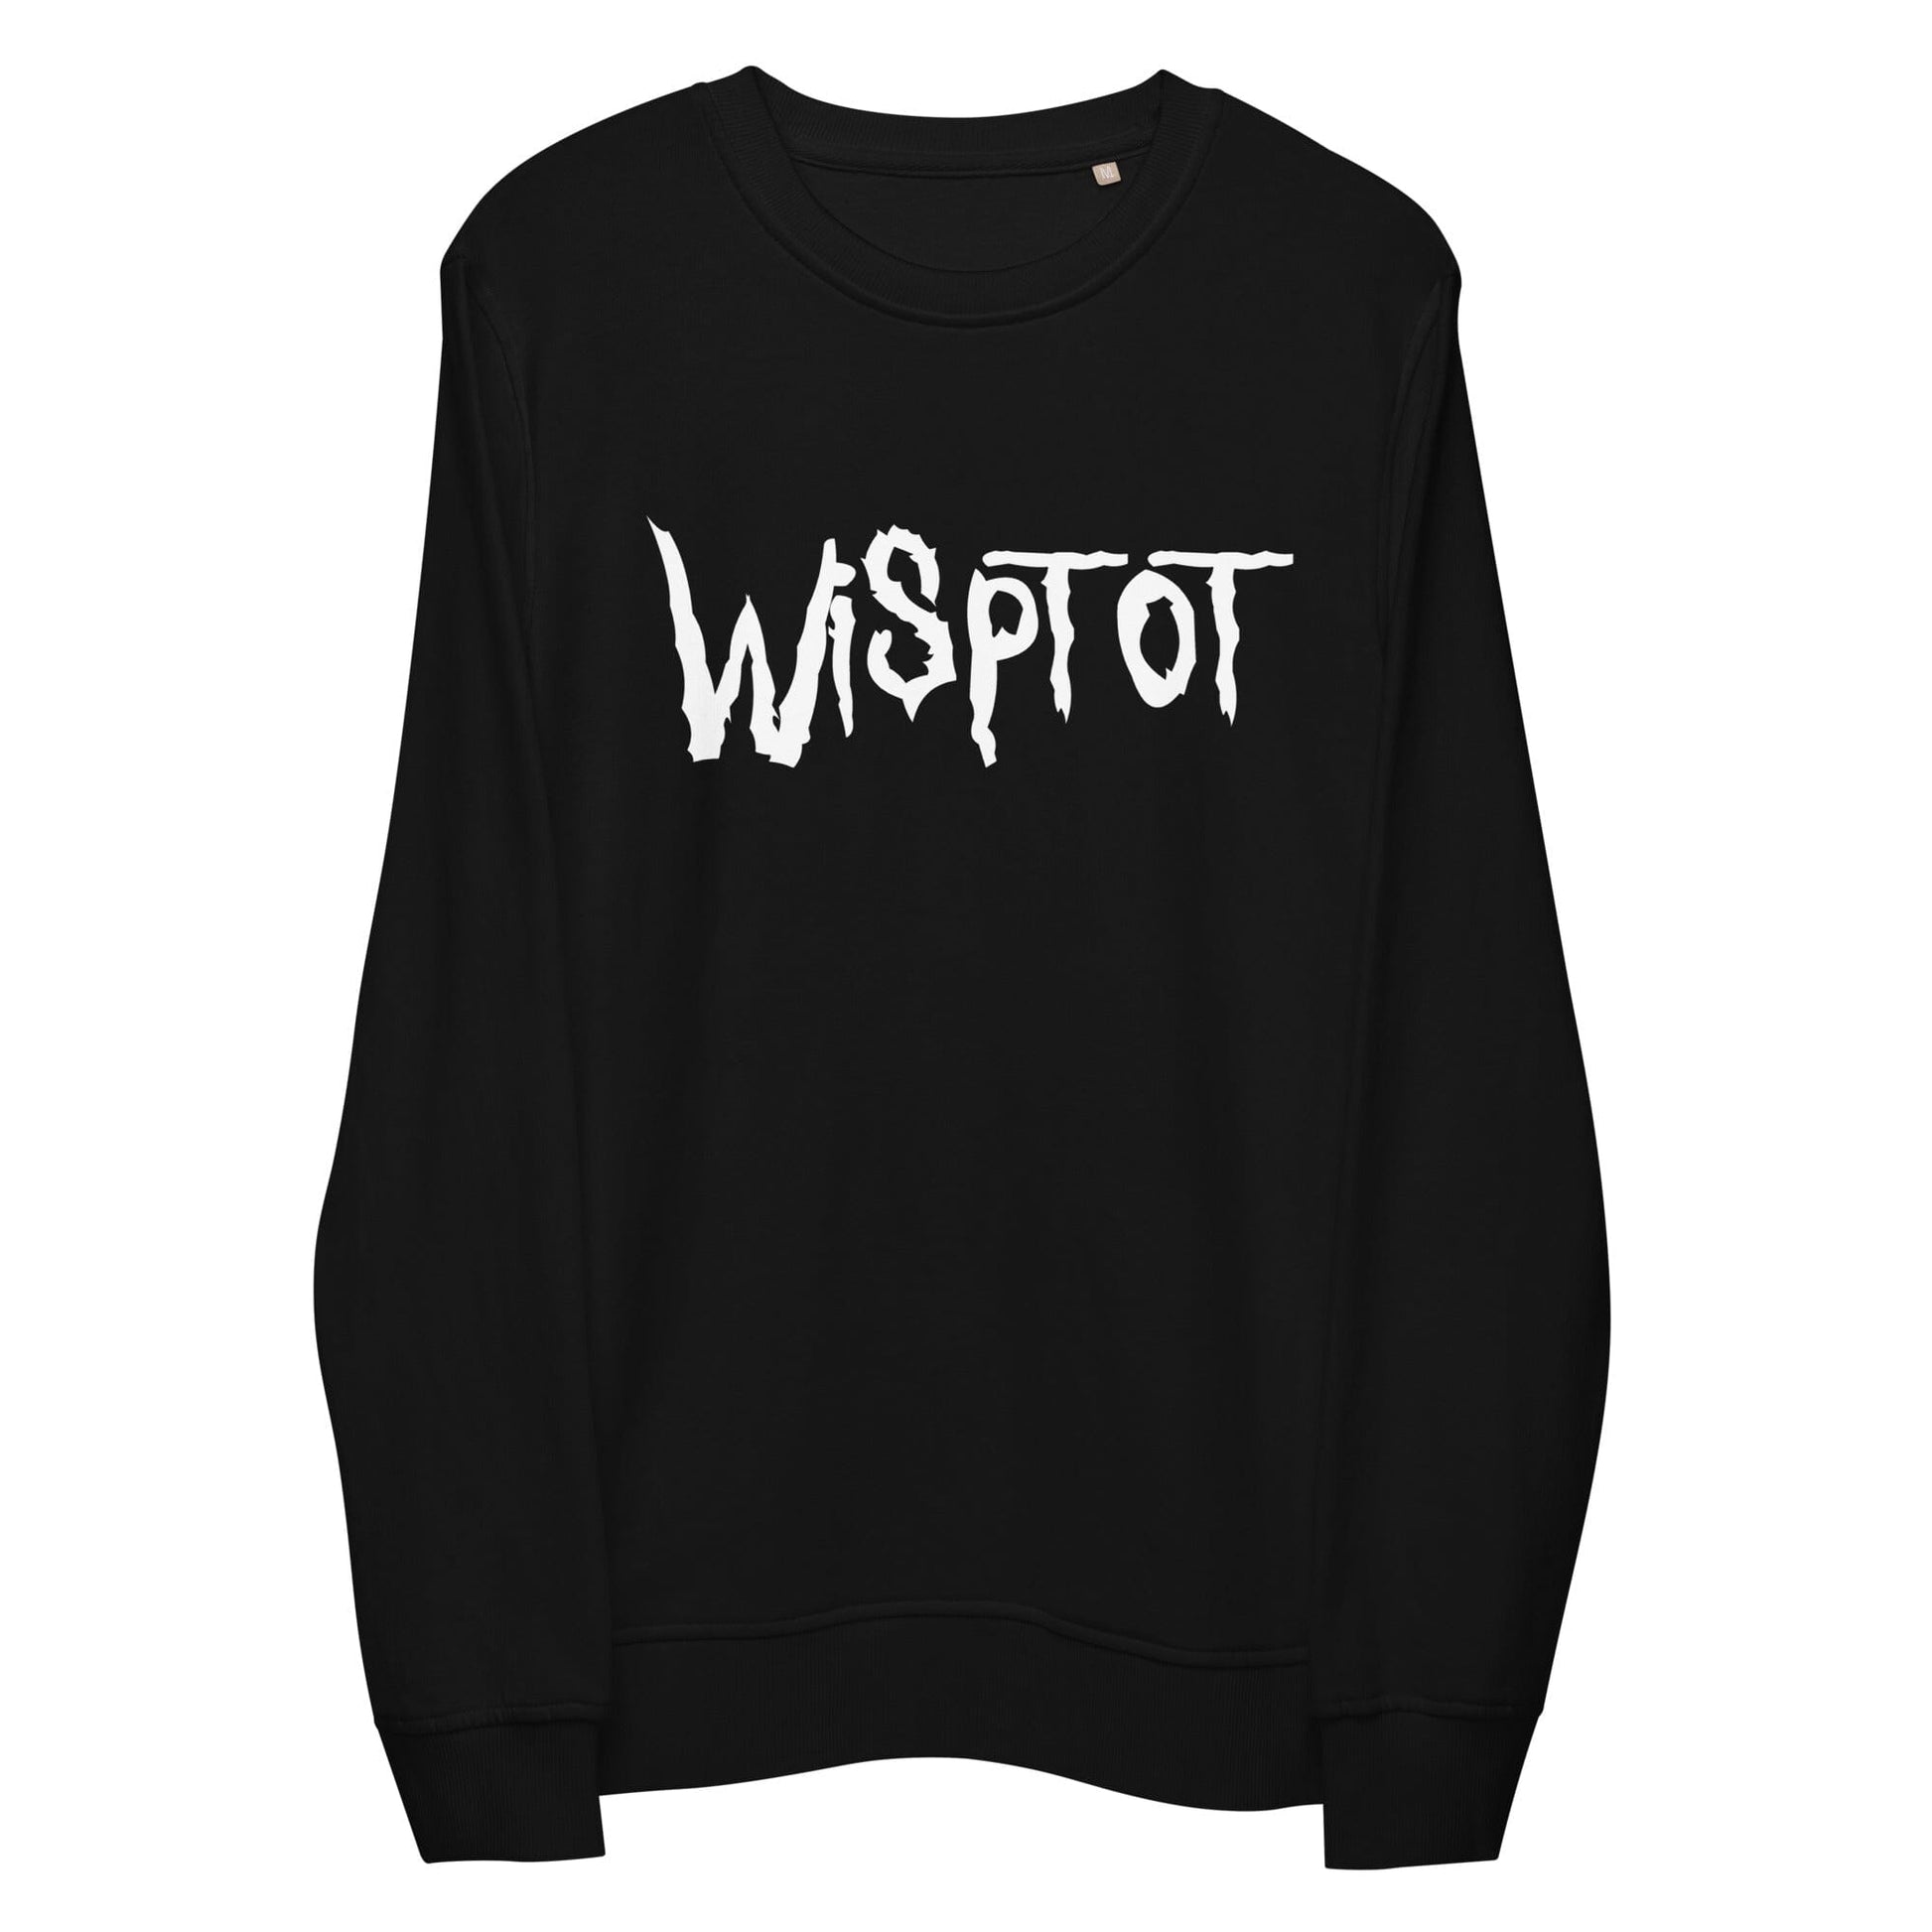 BLACK WispTot Sweatshirt [Unfoiled] (All net proceeds go to equally to Kitty CrusAIDe and Rags to Riches Animal Rescue) JoyousJoyfulJoyness S 